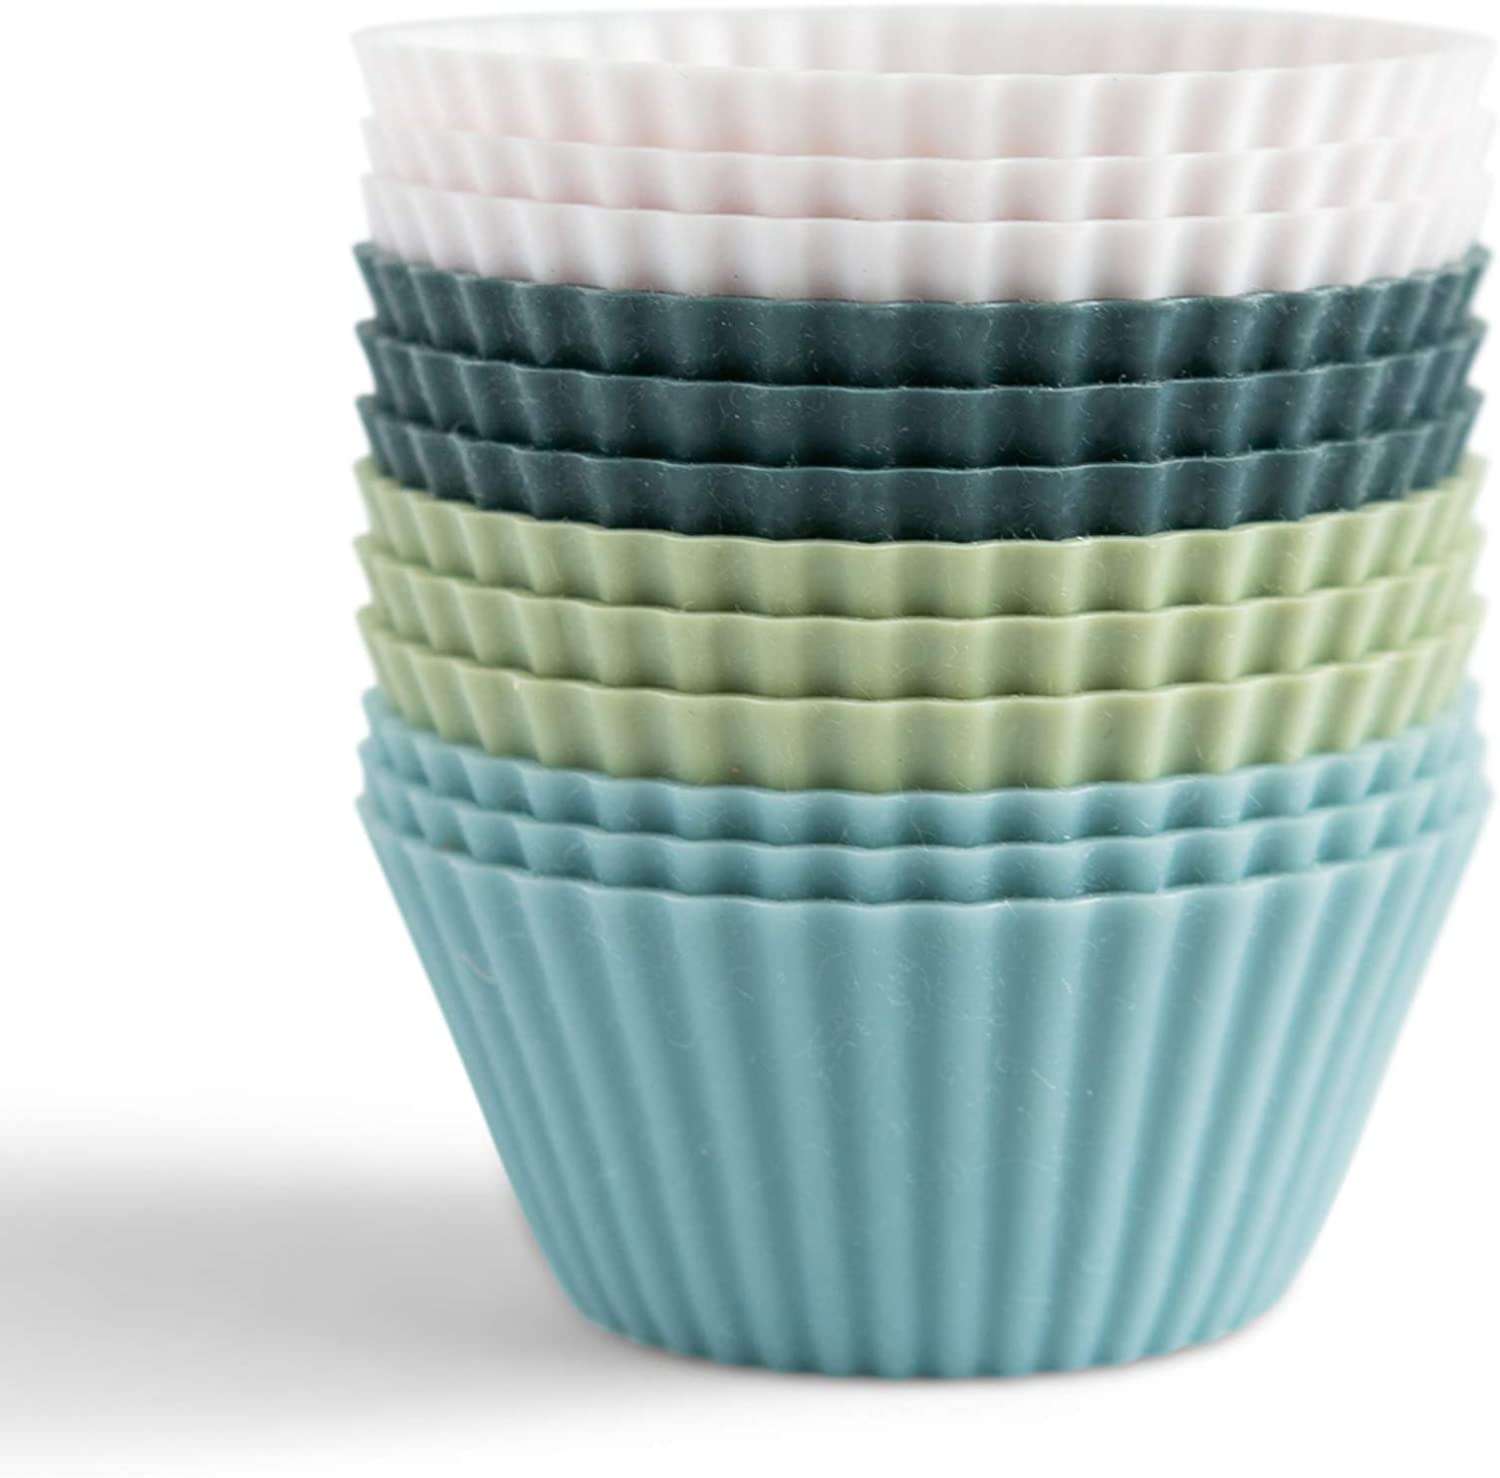 4. The Silicone Kitchen Reusable Muffin Cups